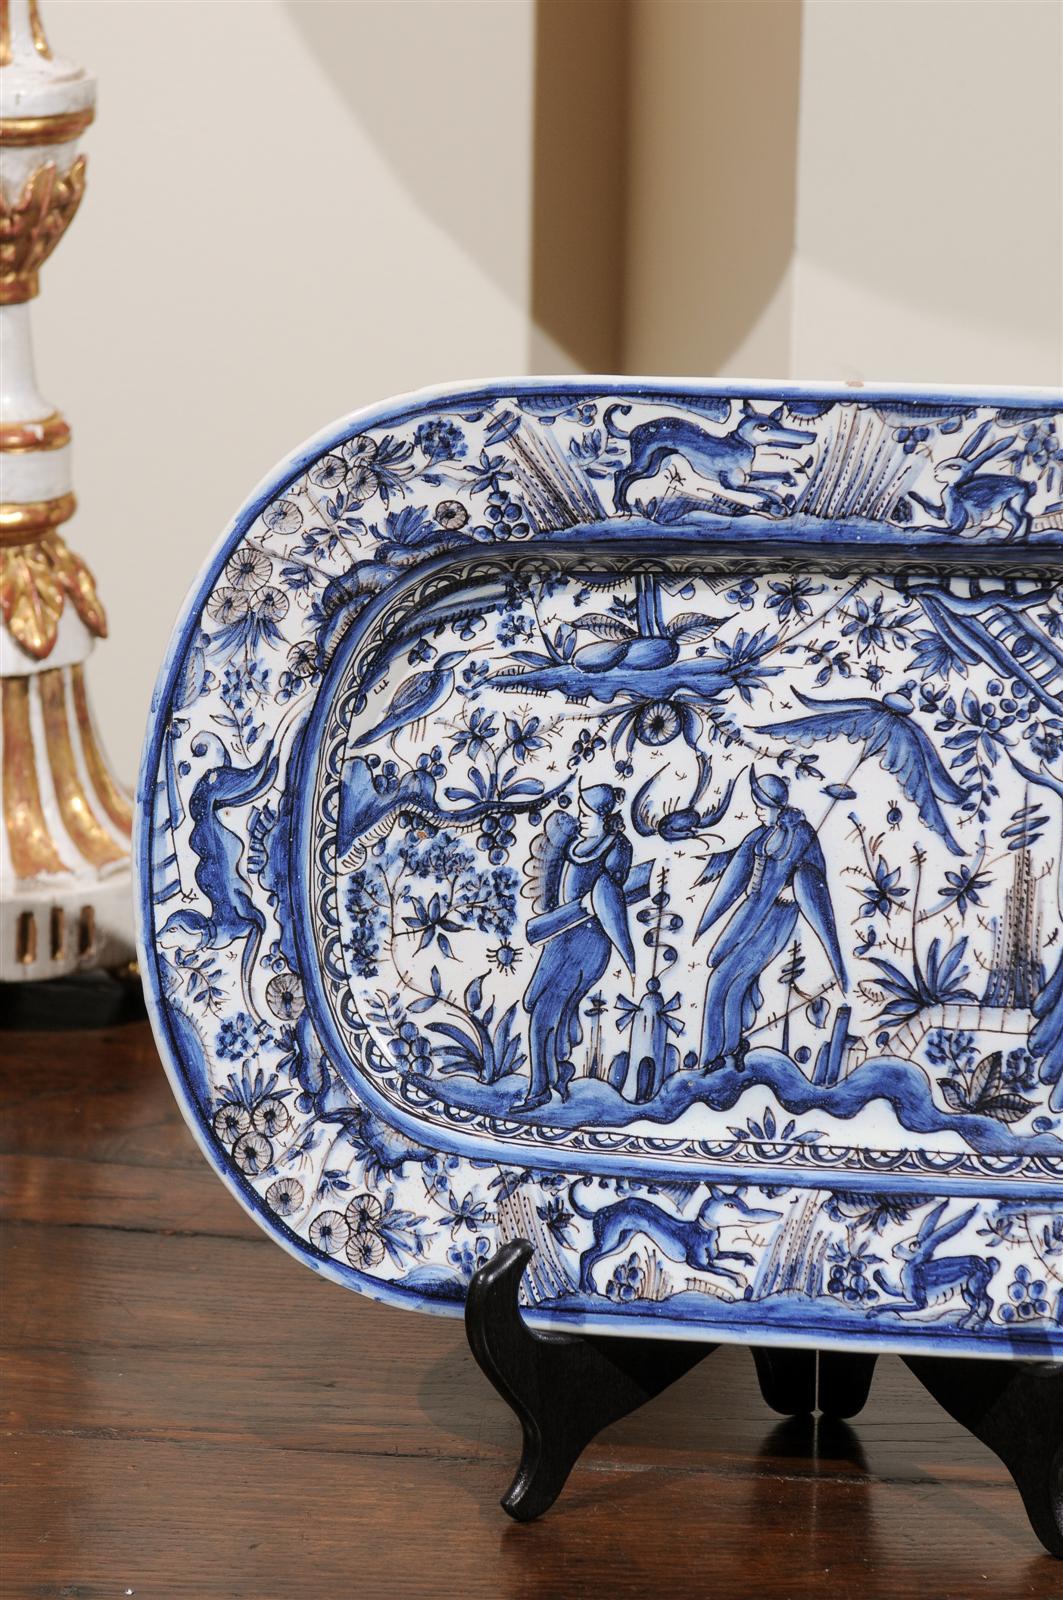 19th Century Blue and White  Italian Faience Platter, Circa 1895 For Sale 3